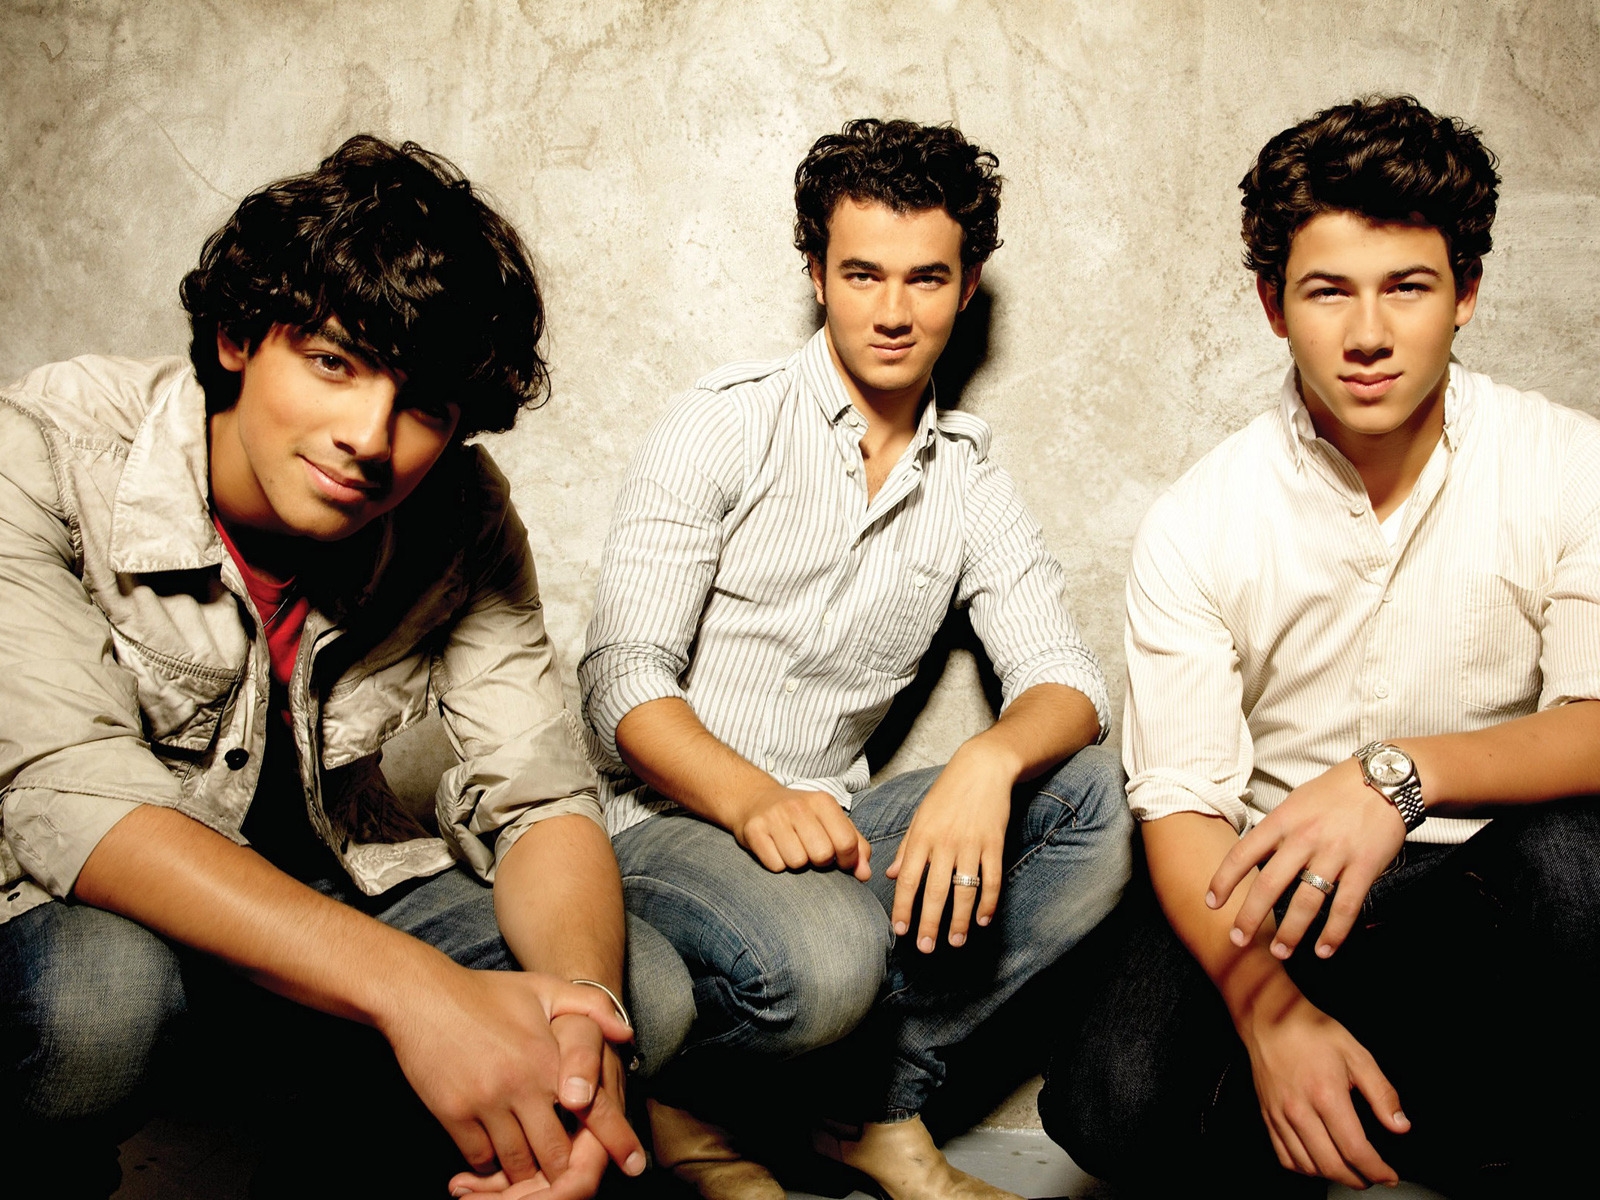 Cool Jonas Brothers for 1600 x 1200 resolution